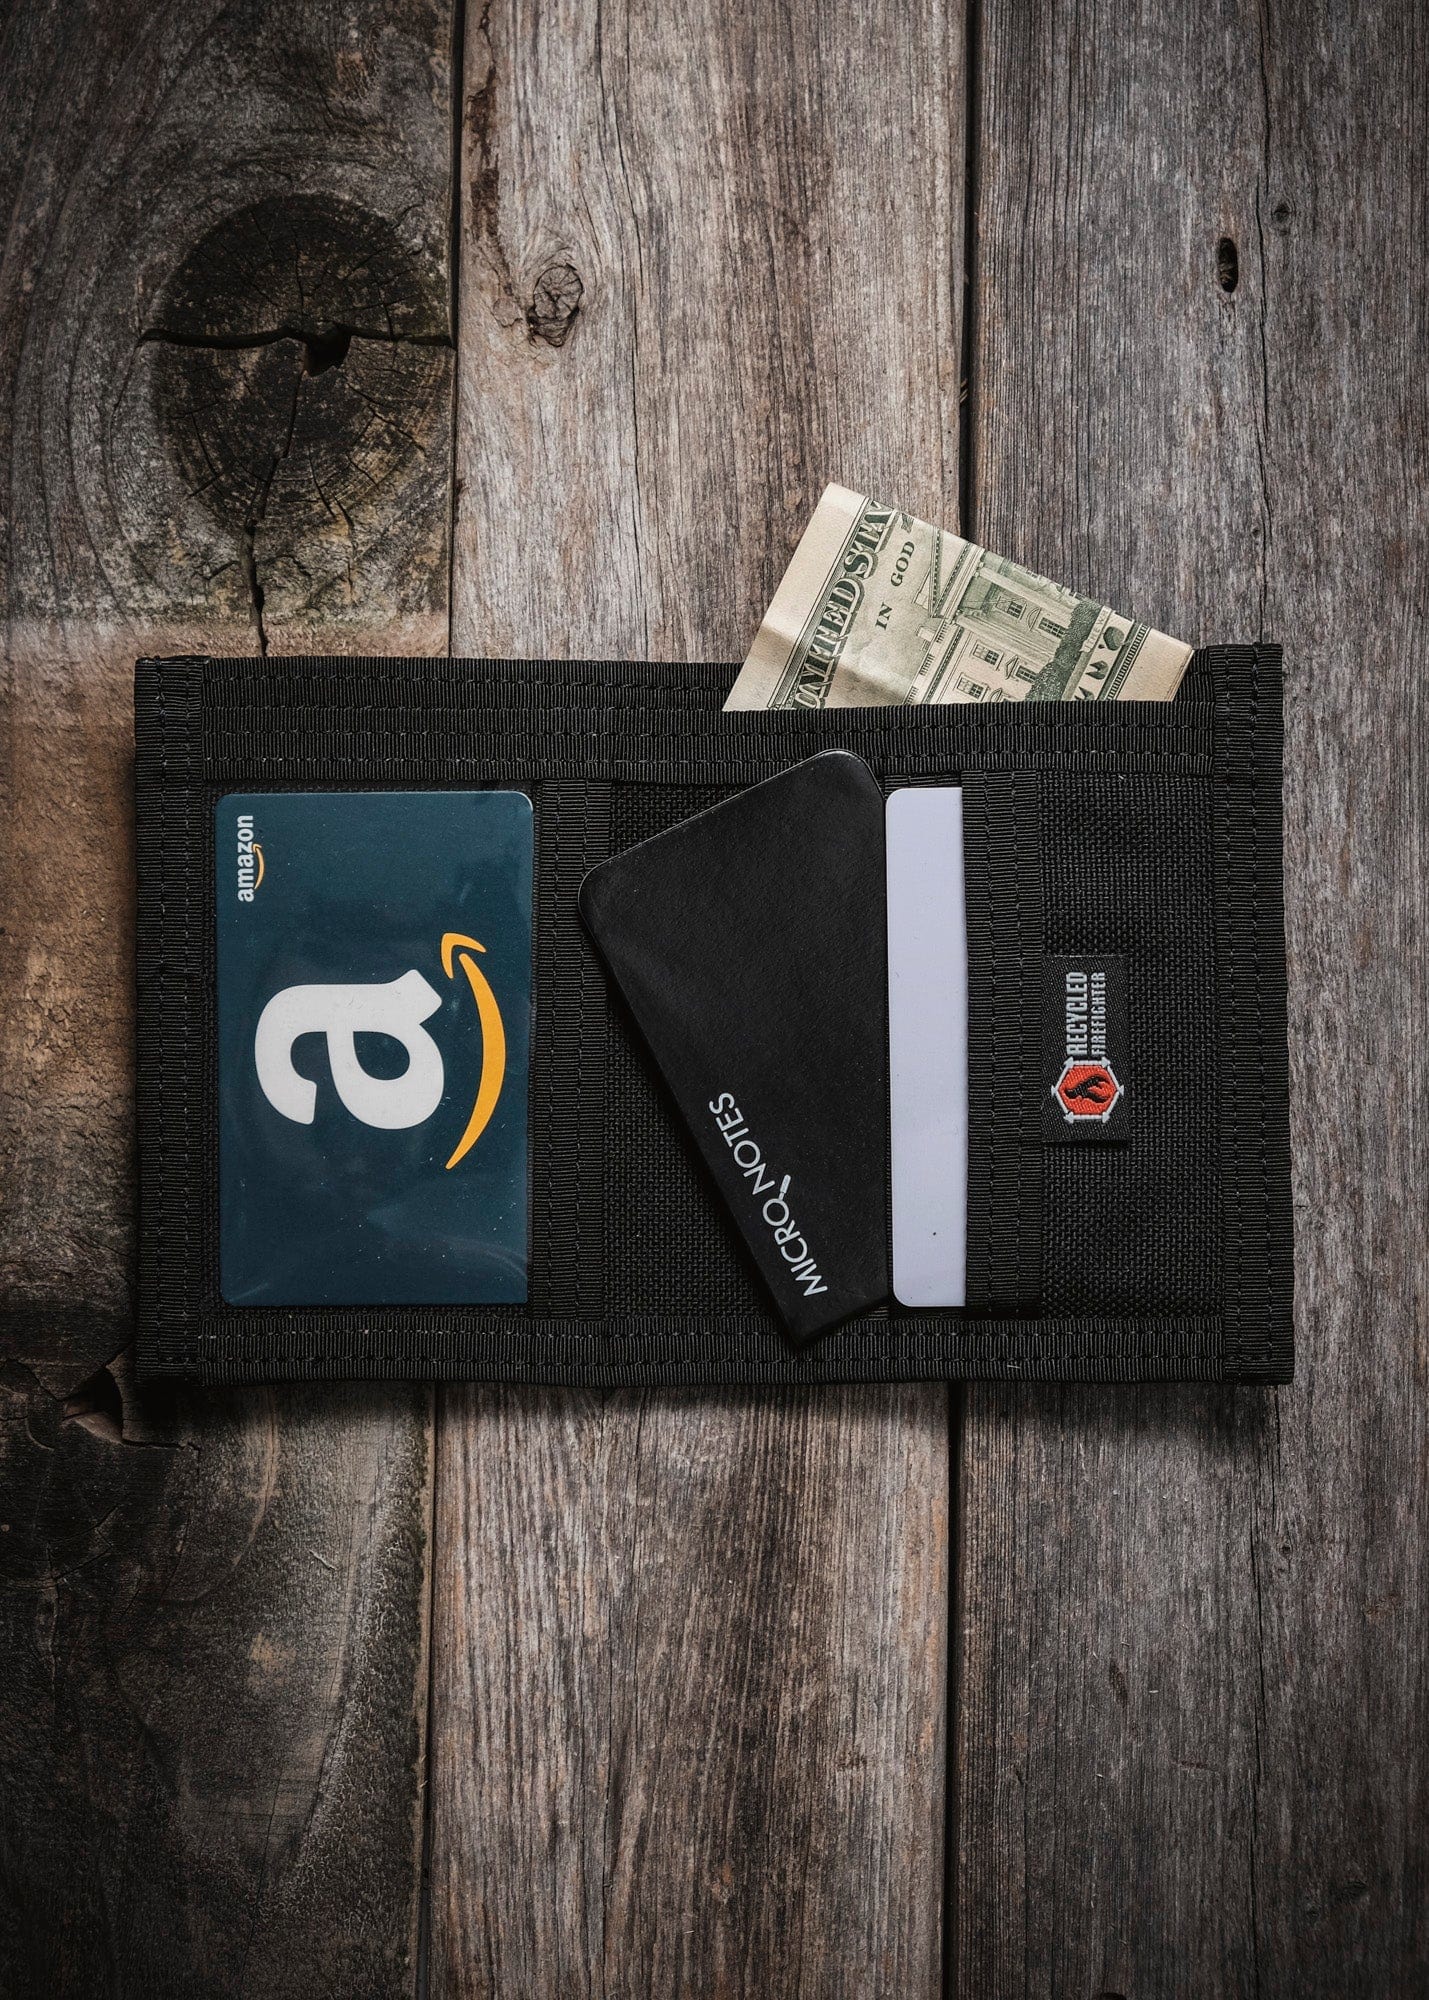 Chief Miller Wallet "The Captain" Apparel